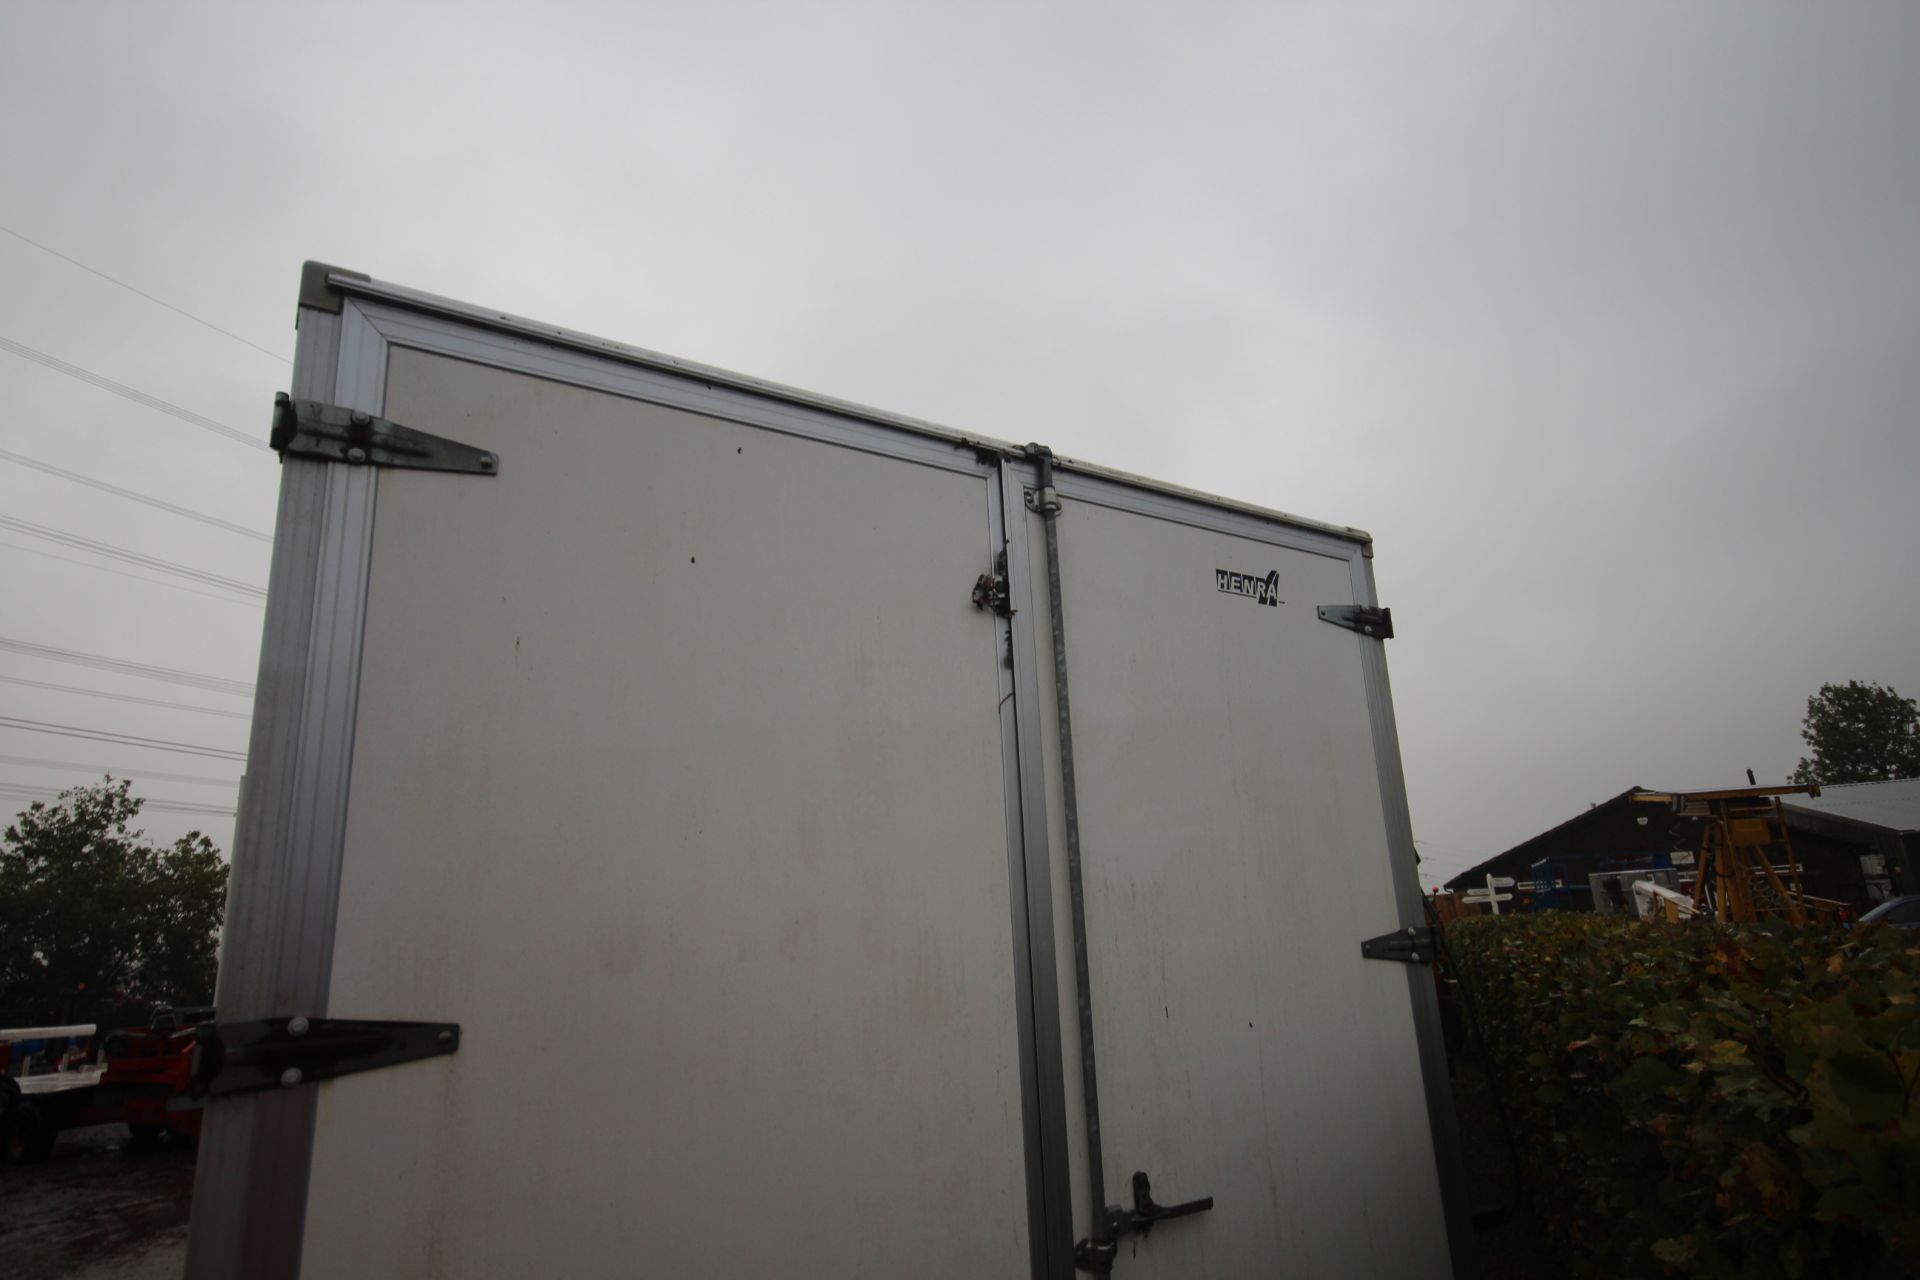 Henra 17ft 5in x 7ft 6in twin axle exhibition/ box trailer. With barn doors, side opening and - Image 10 of 16